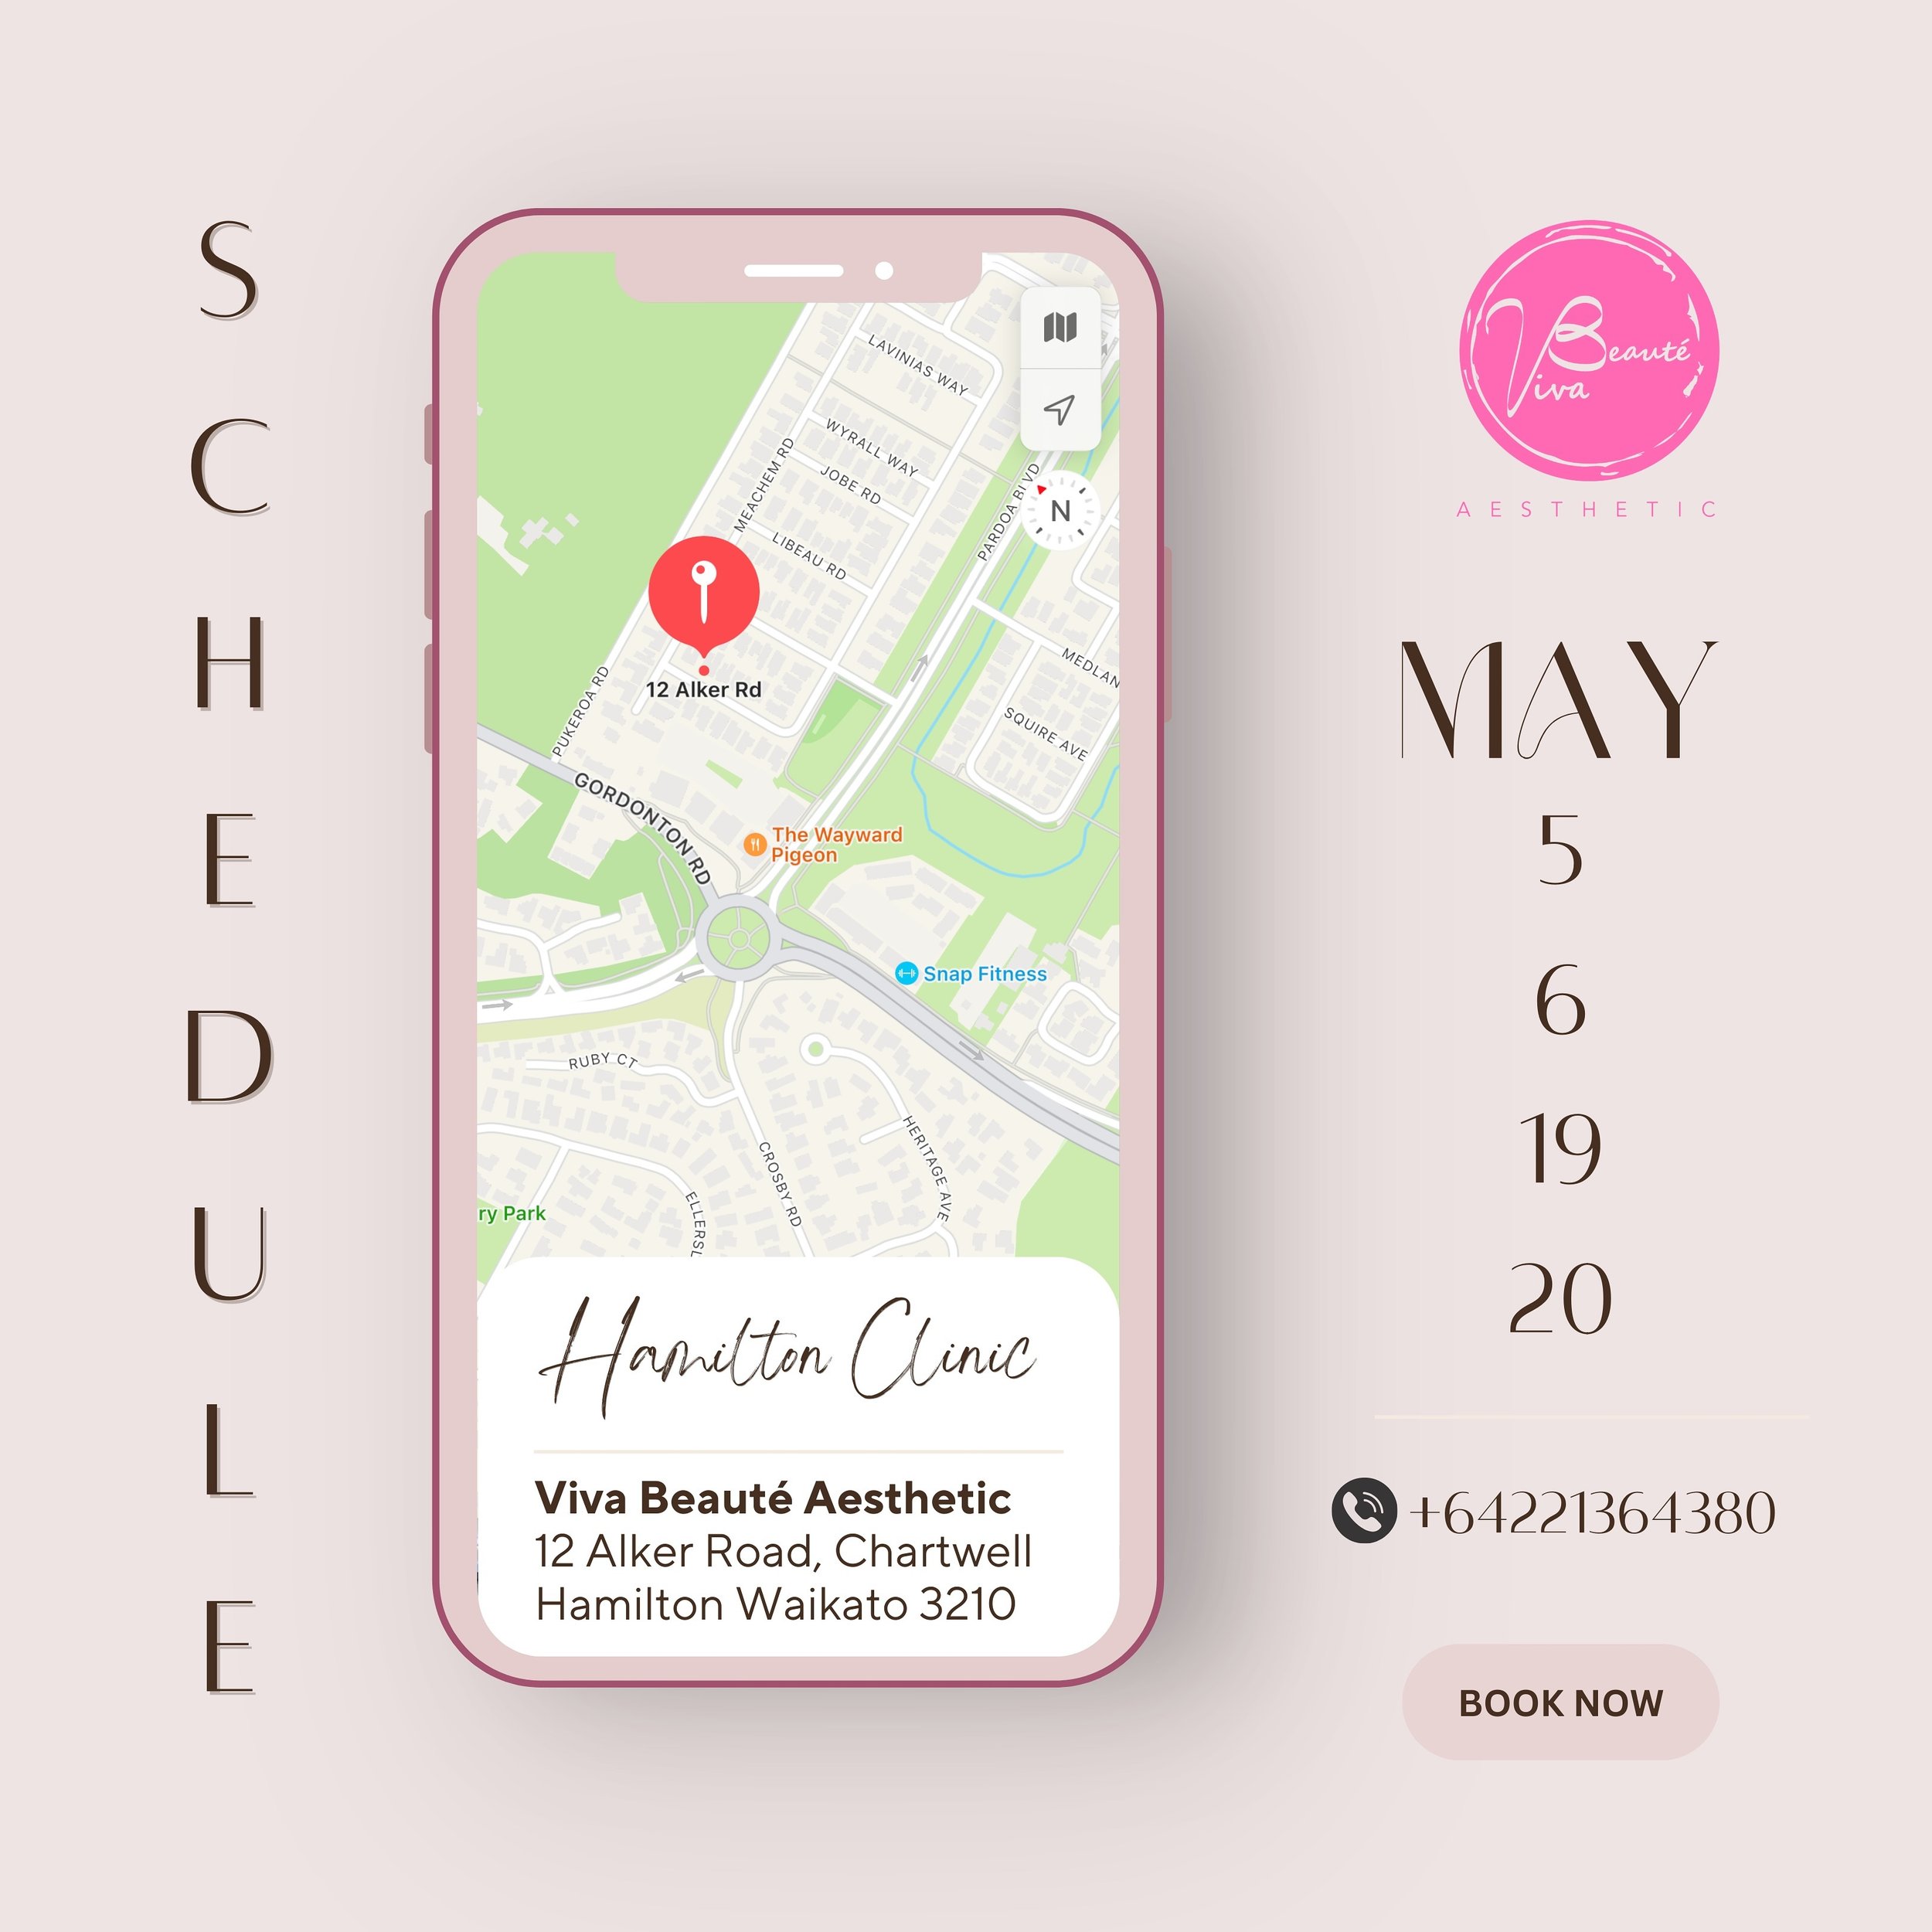 And we&rsquo;re back! Happy Monday! 🌷 We can&rsquo;t believe we&rsquo;re almost in the middle of 2024! Here&rsquo;s our Hamilton clinic schedule for the coming month of May 2024: 

✅ May 5 , Sunday
✅ Apr 6, Monday 
✅ May 19, Sunday
✅ May 20, Monday
